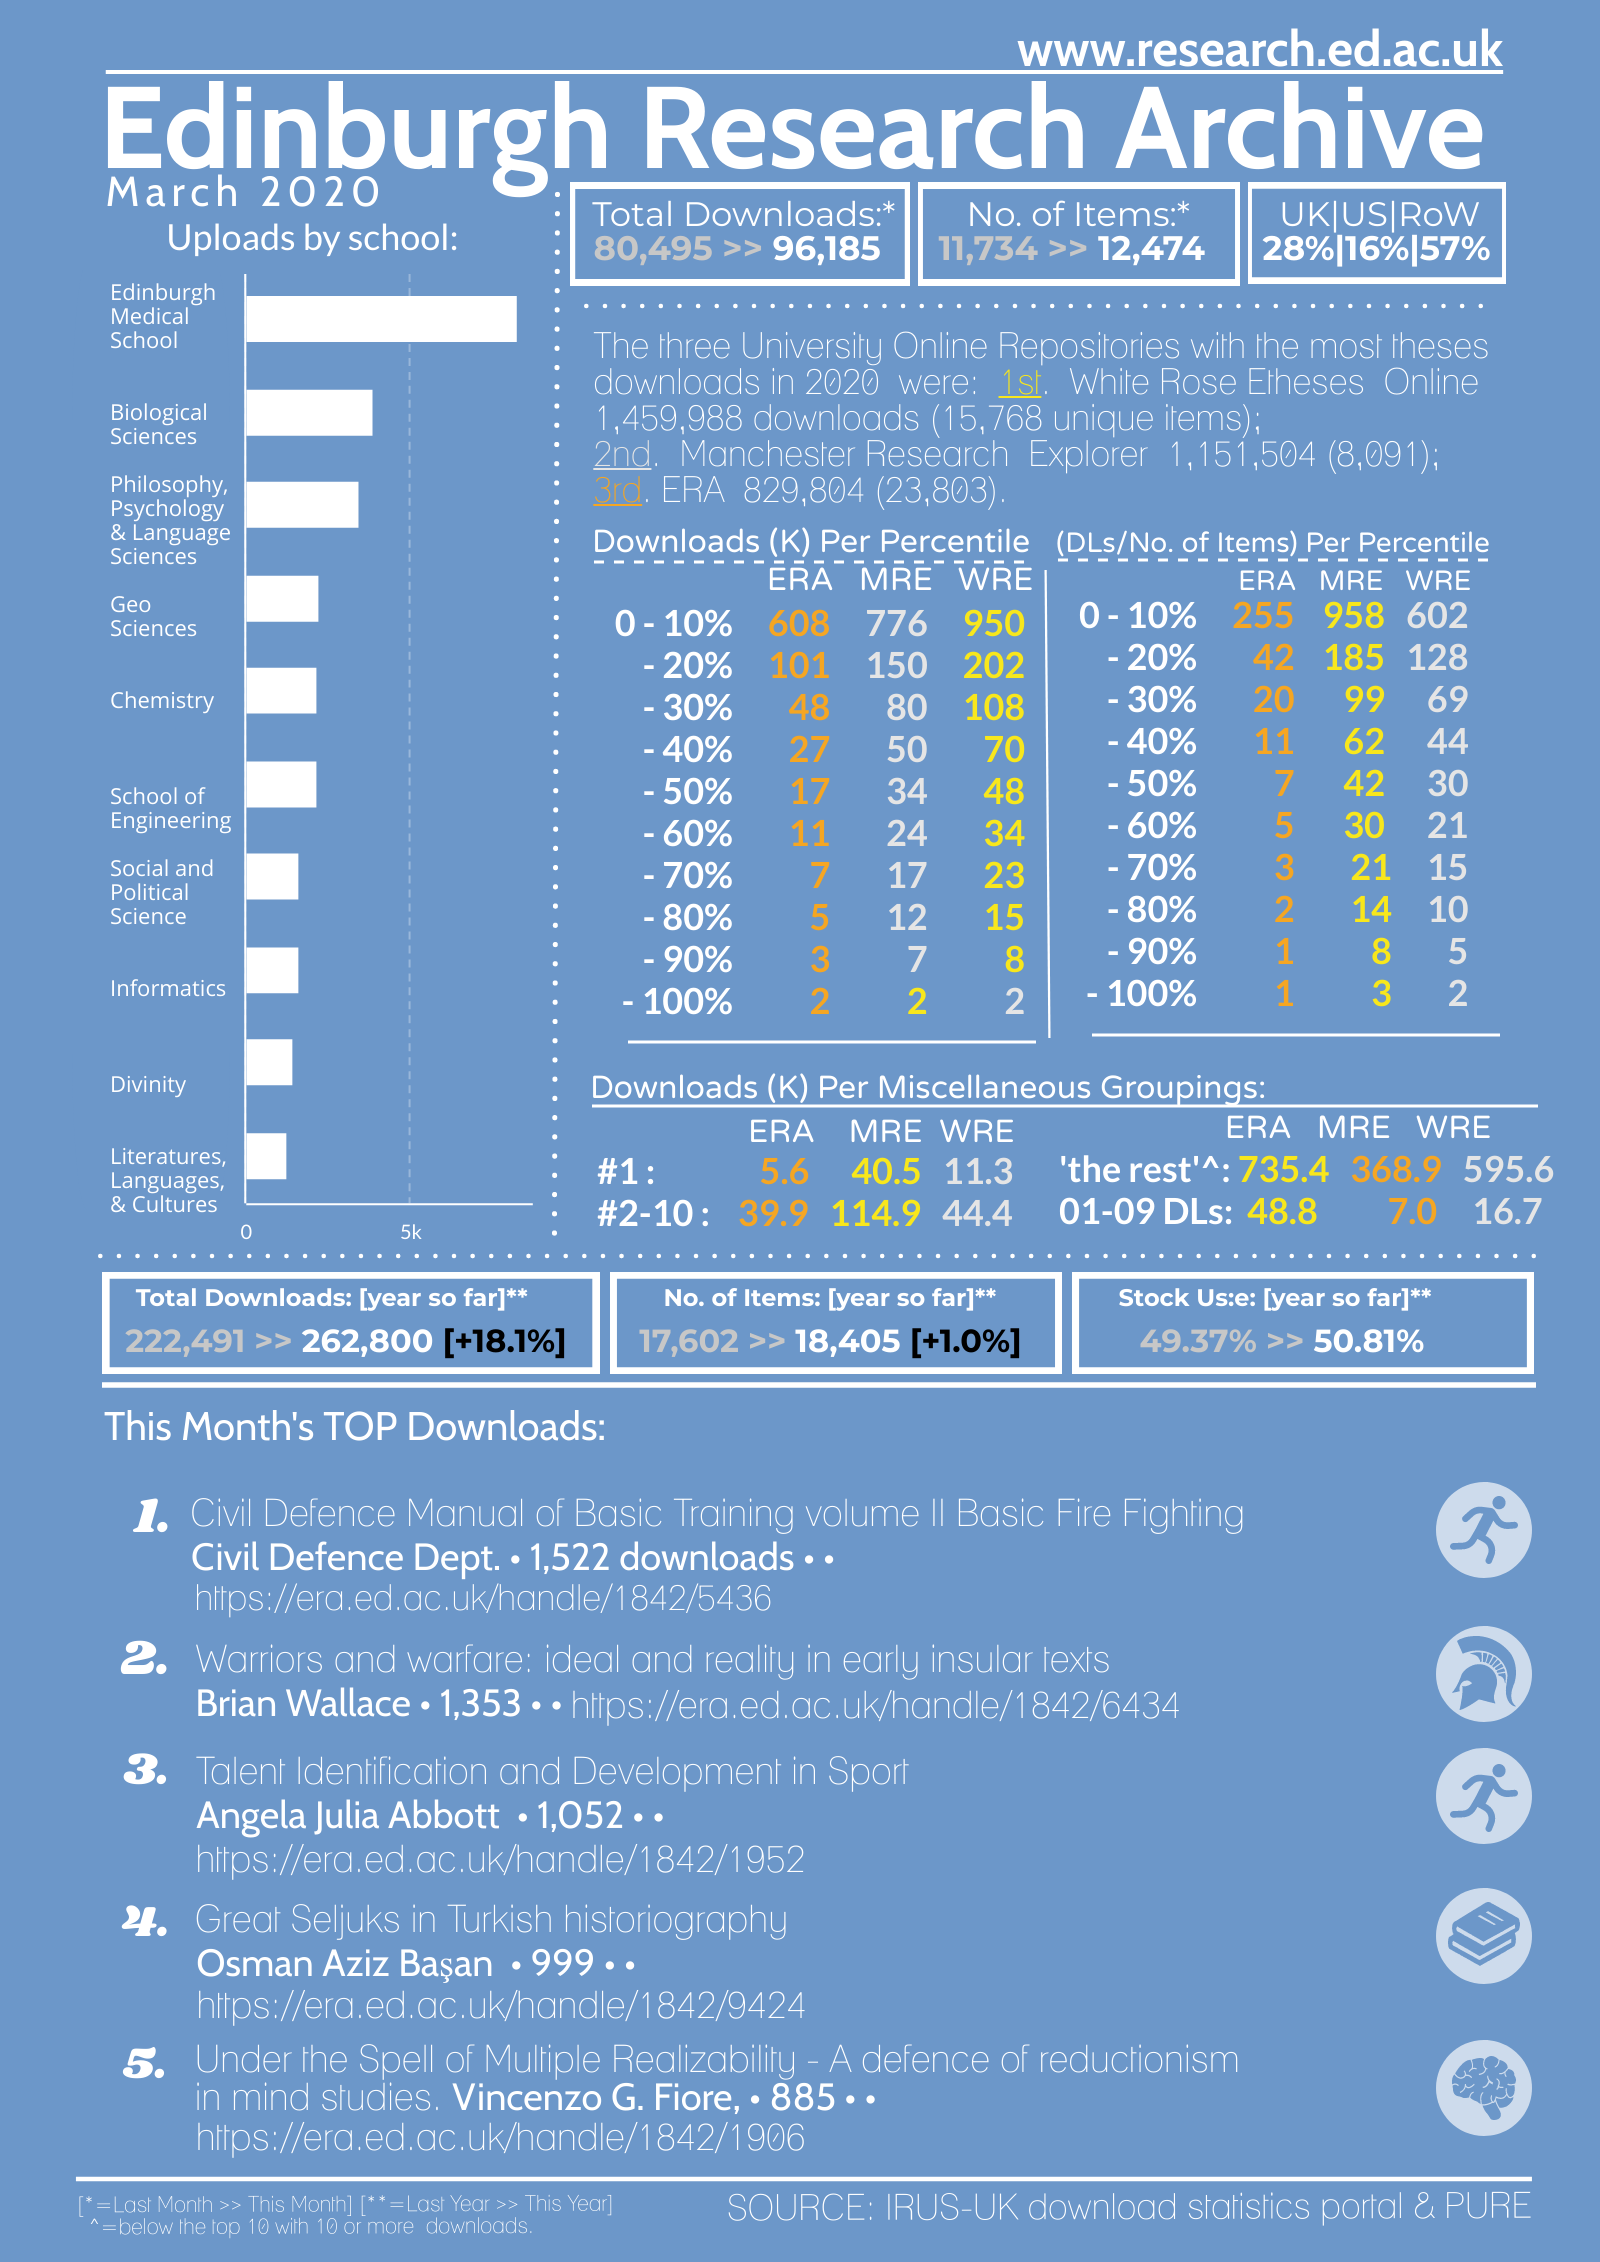 Edinburgh Research Archive: March 2021 downloads infographic